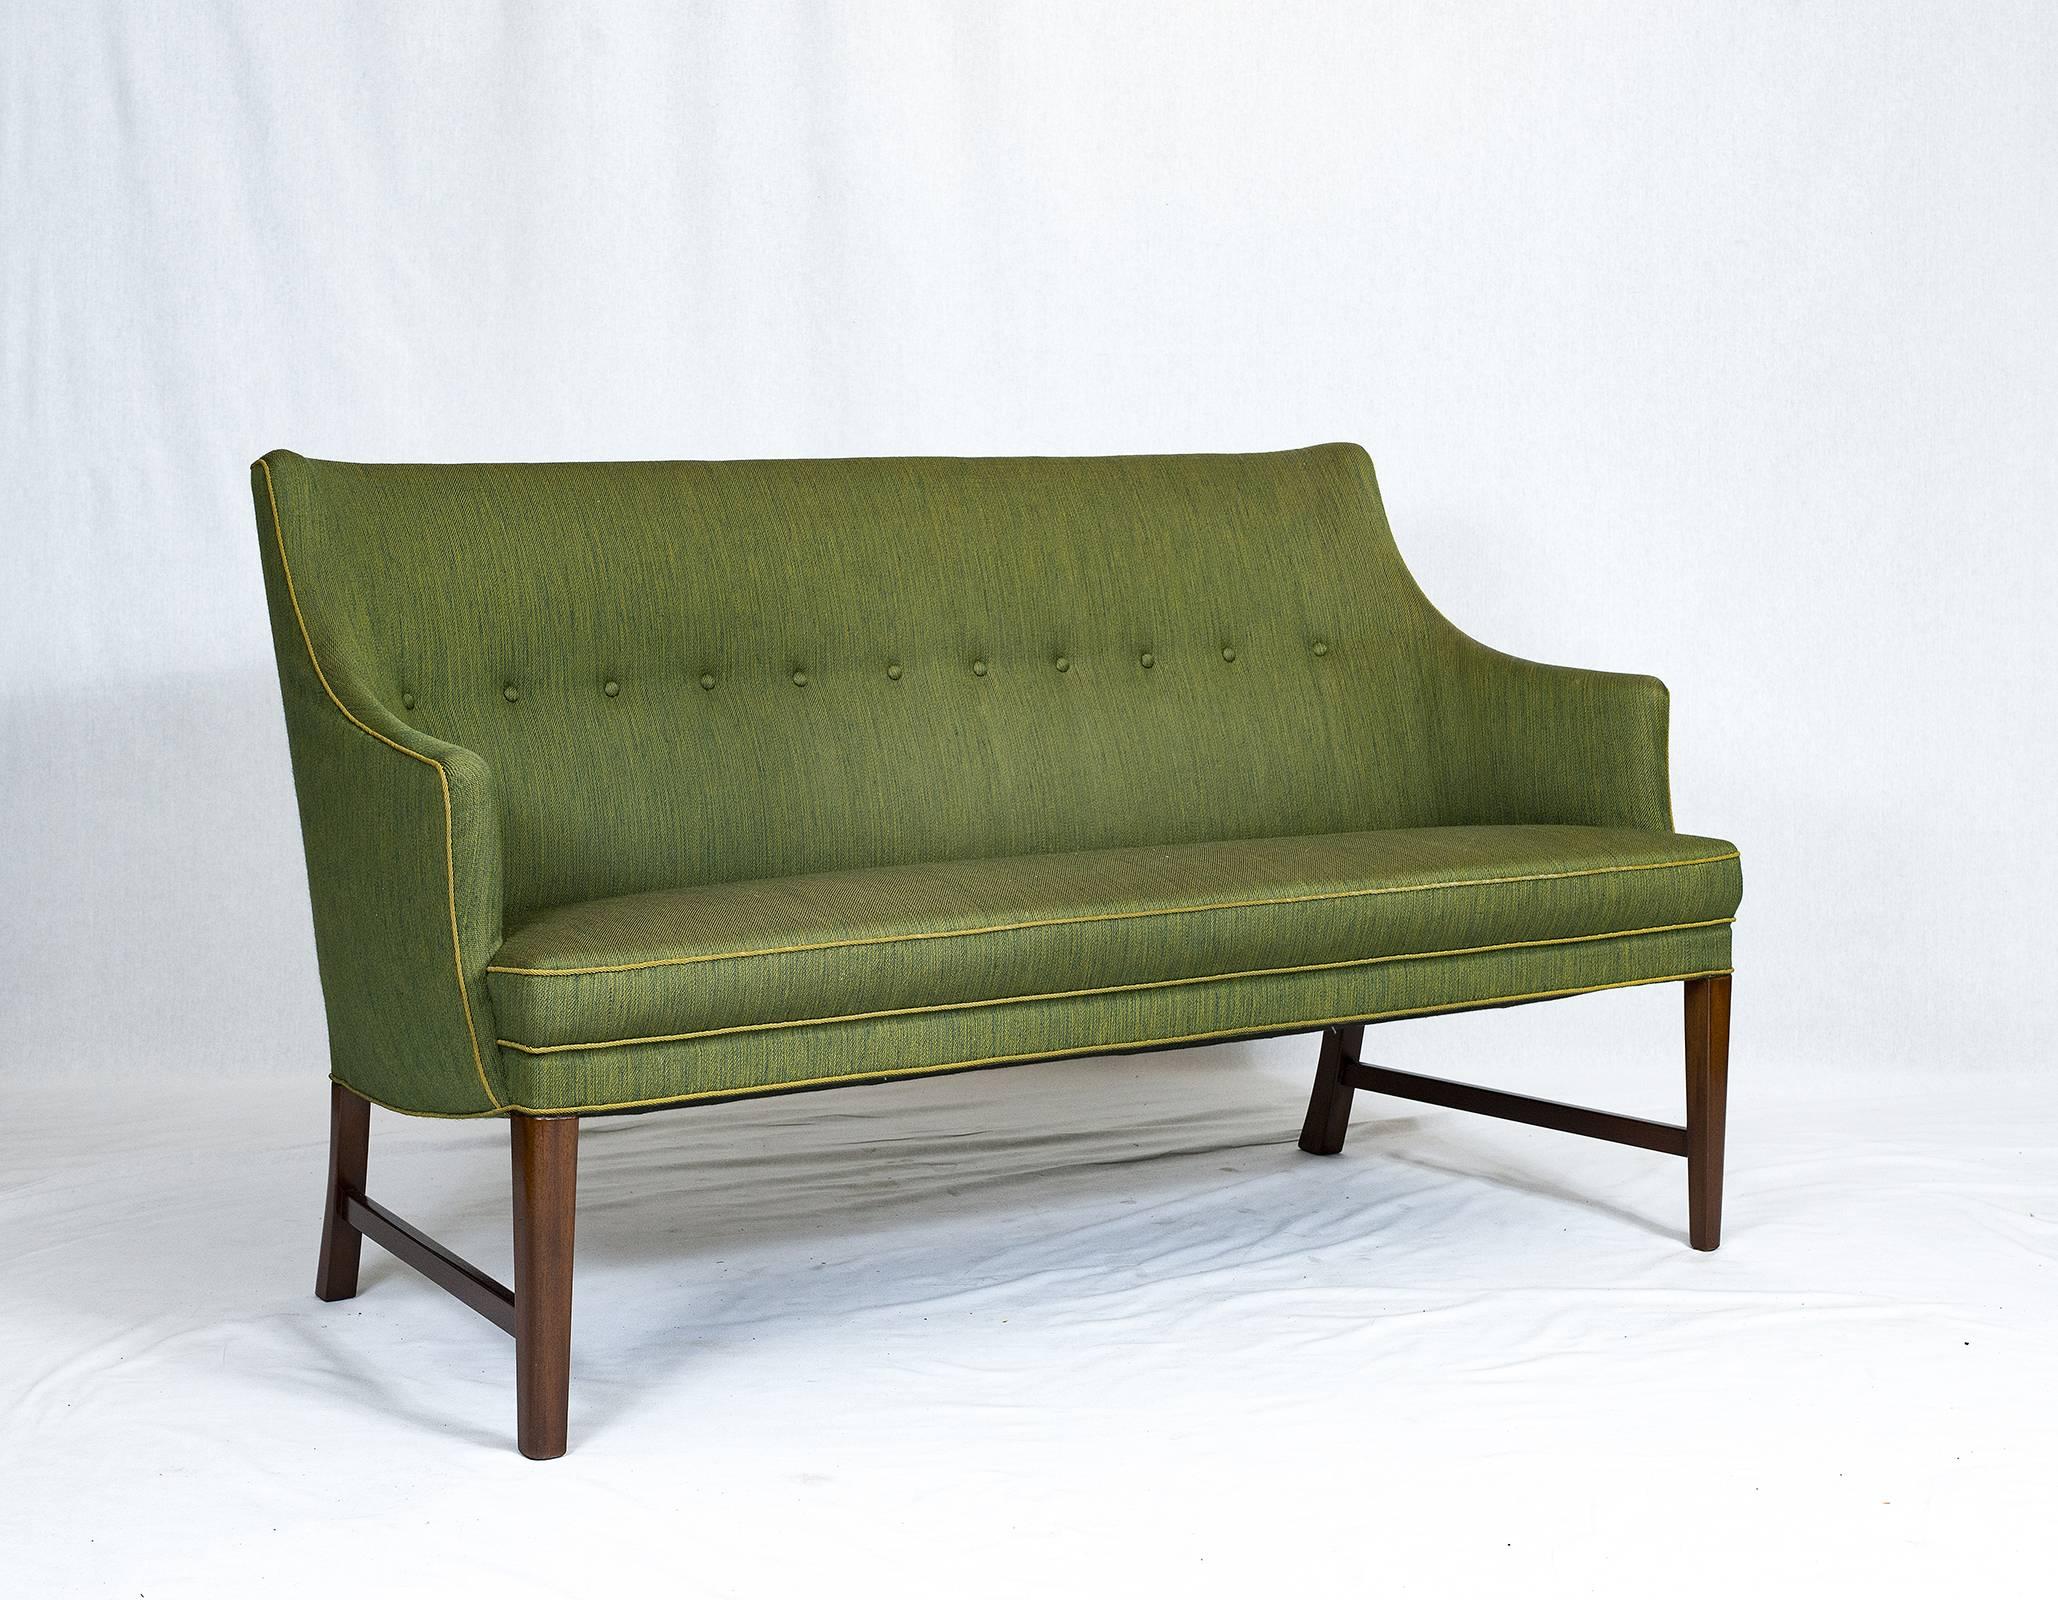 Frits Henningsen settee from the 1940s.    Store formerly known as ARTFUL DODGER INC